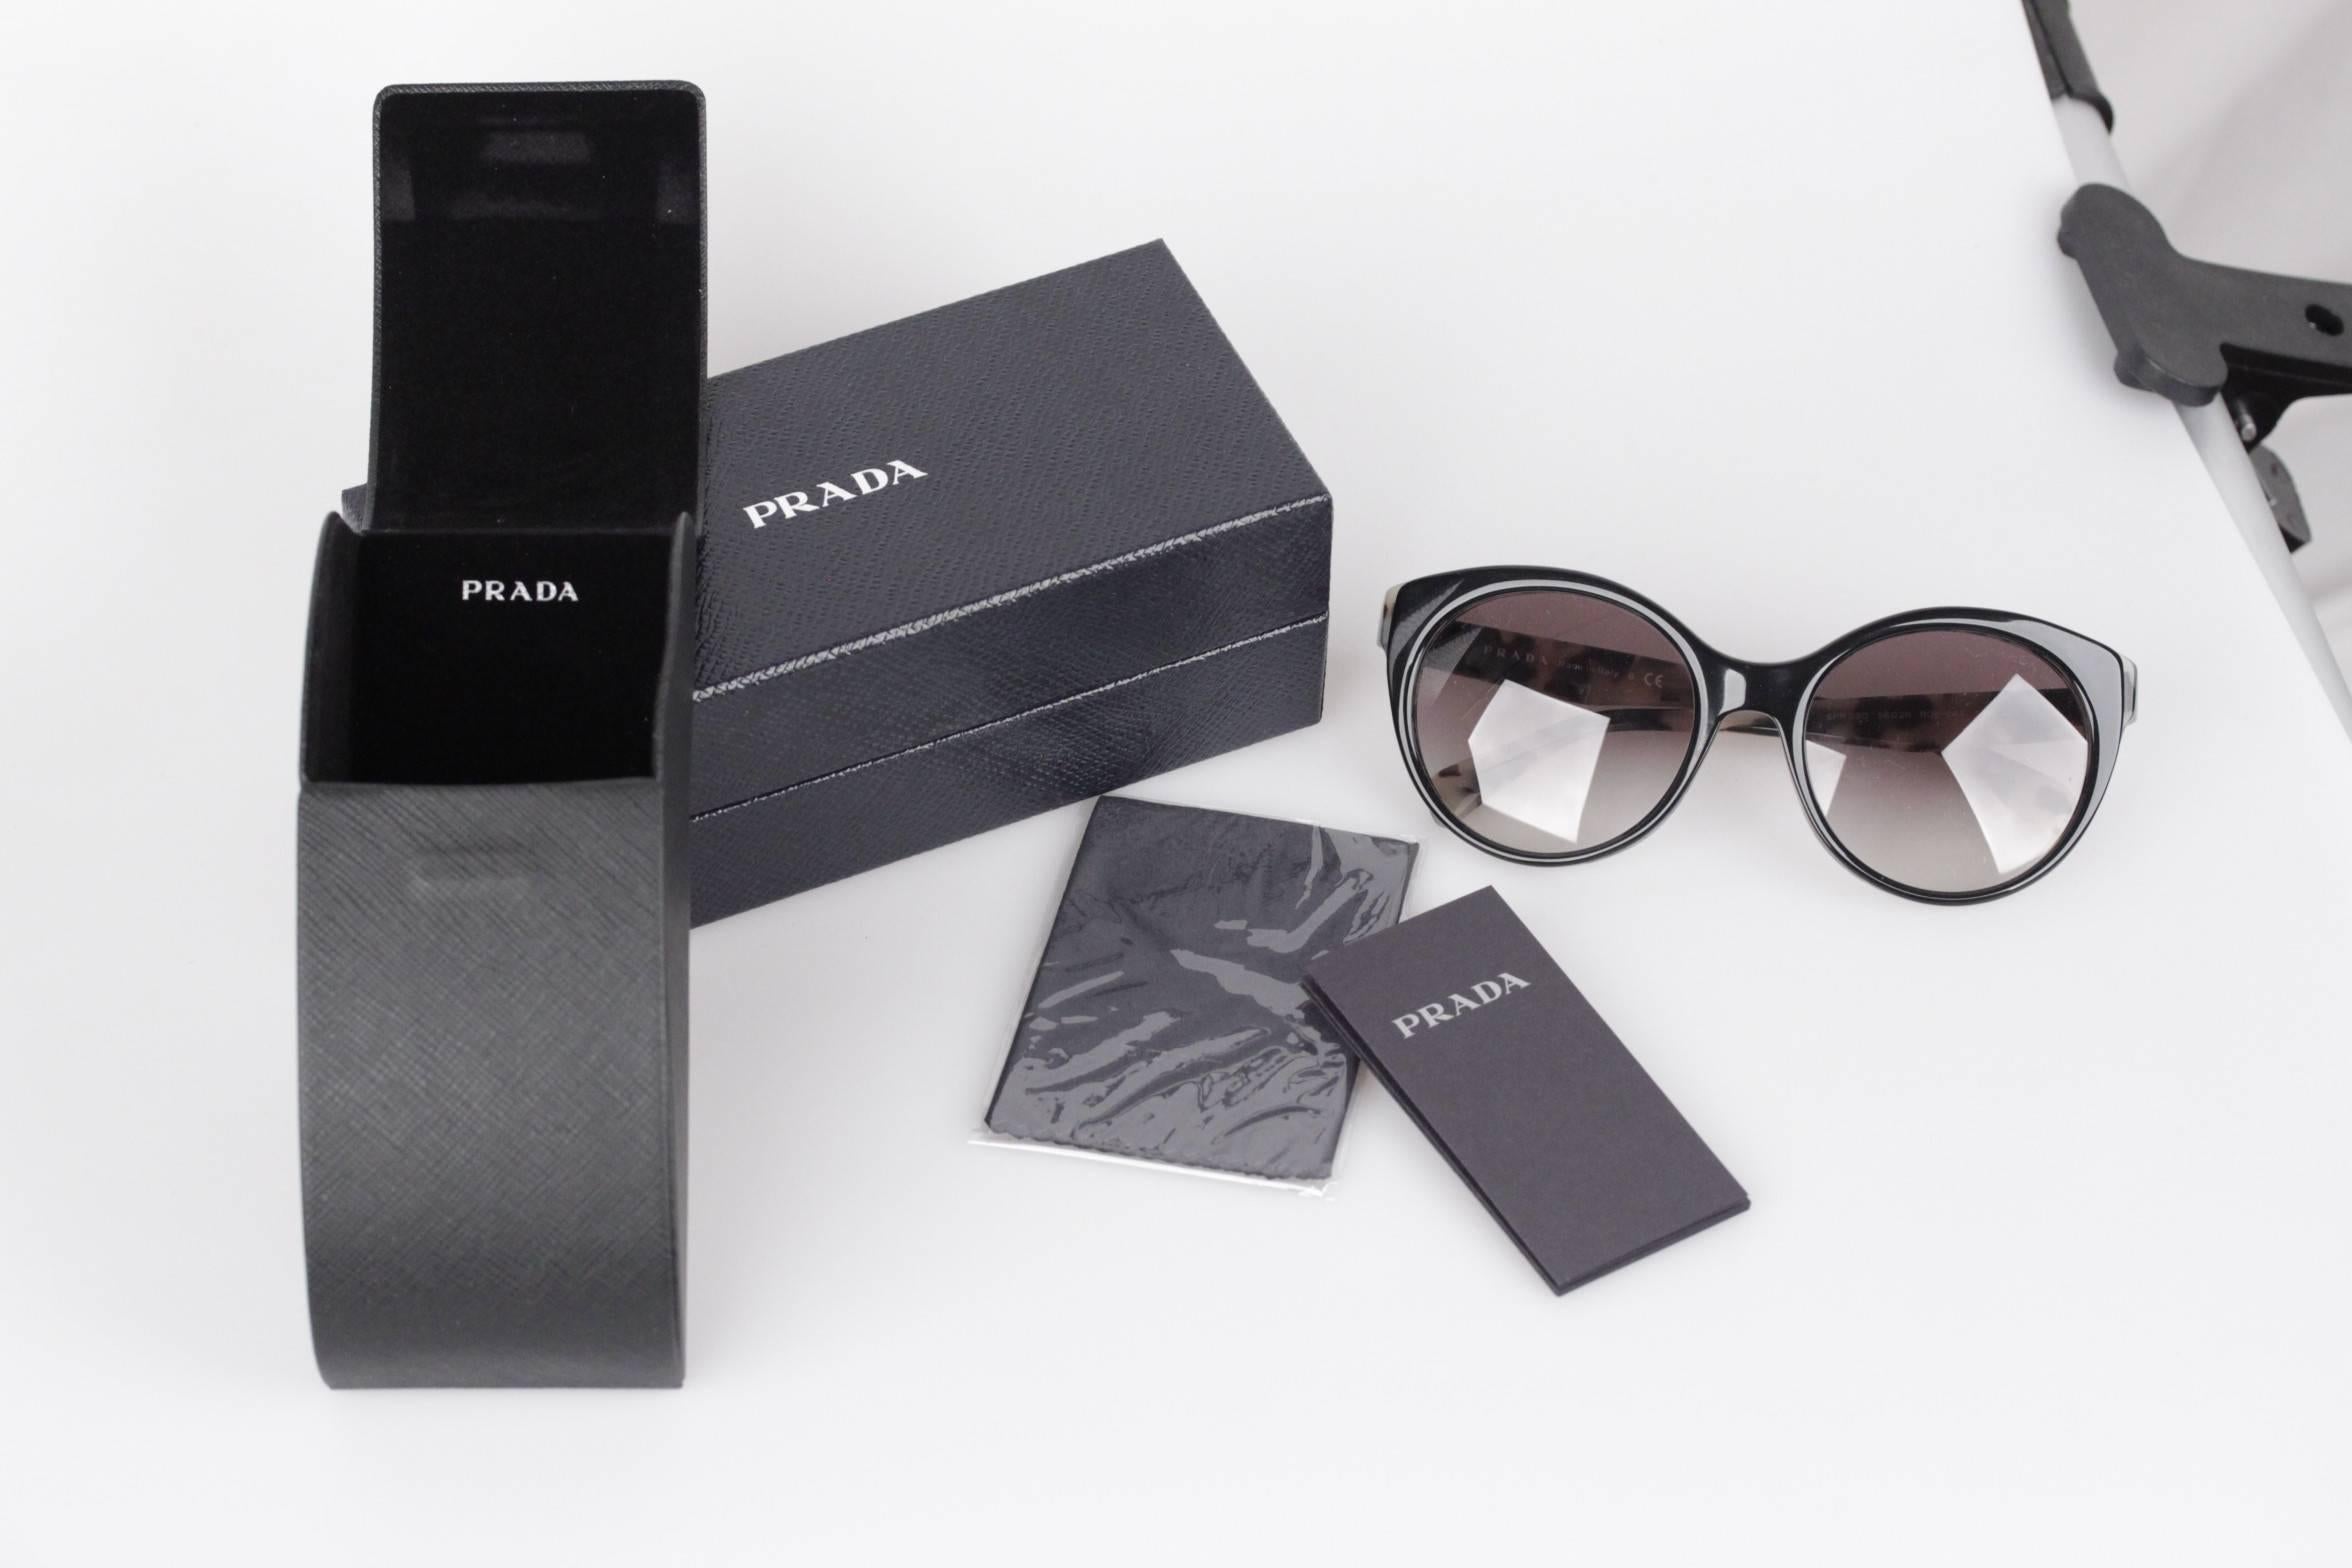 - PRADA sunglasses, made in Italy

- mod: SPR 230 - 56/20 - ROK-0A7 - 140 - 2N

- Black ROUND CAT-EYE frame, with ANIMALIER print on the inside part

- GRADIENT brown ORIGINAL lens

- They will come with its PRADA shop case, rigid case, shop